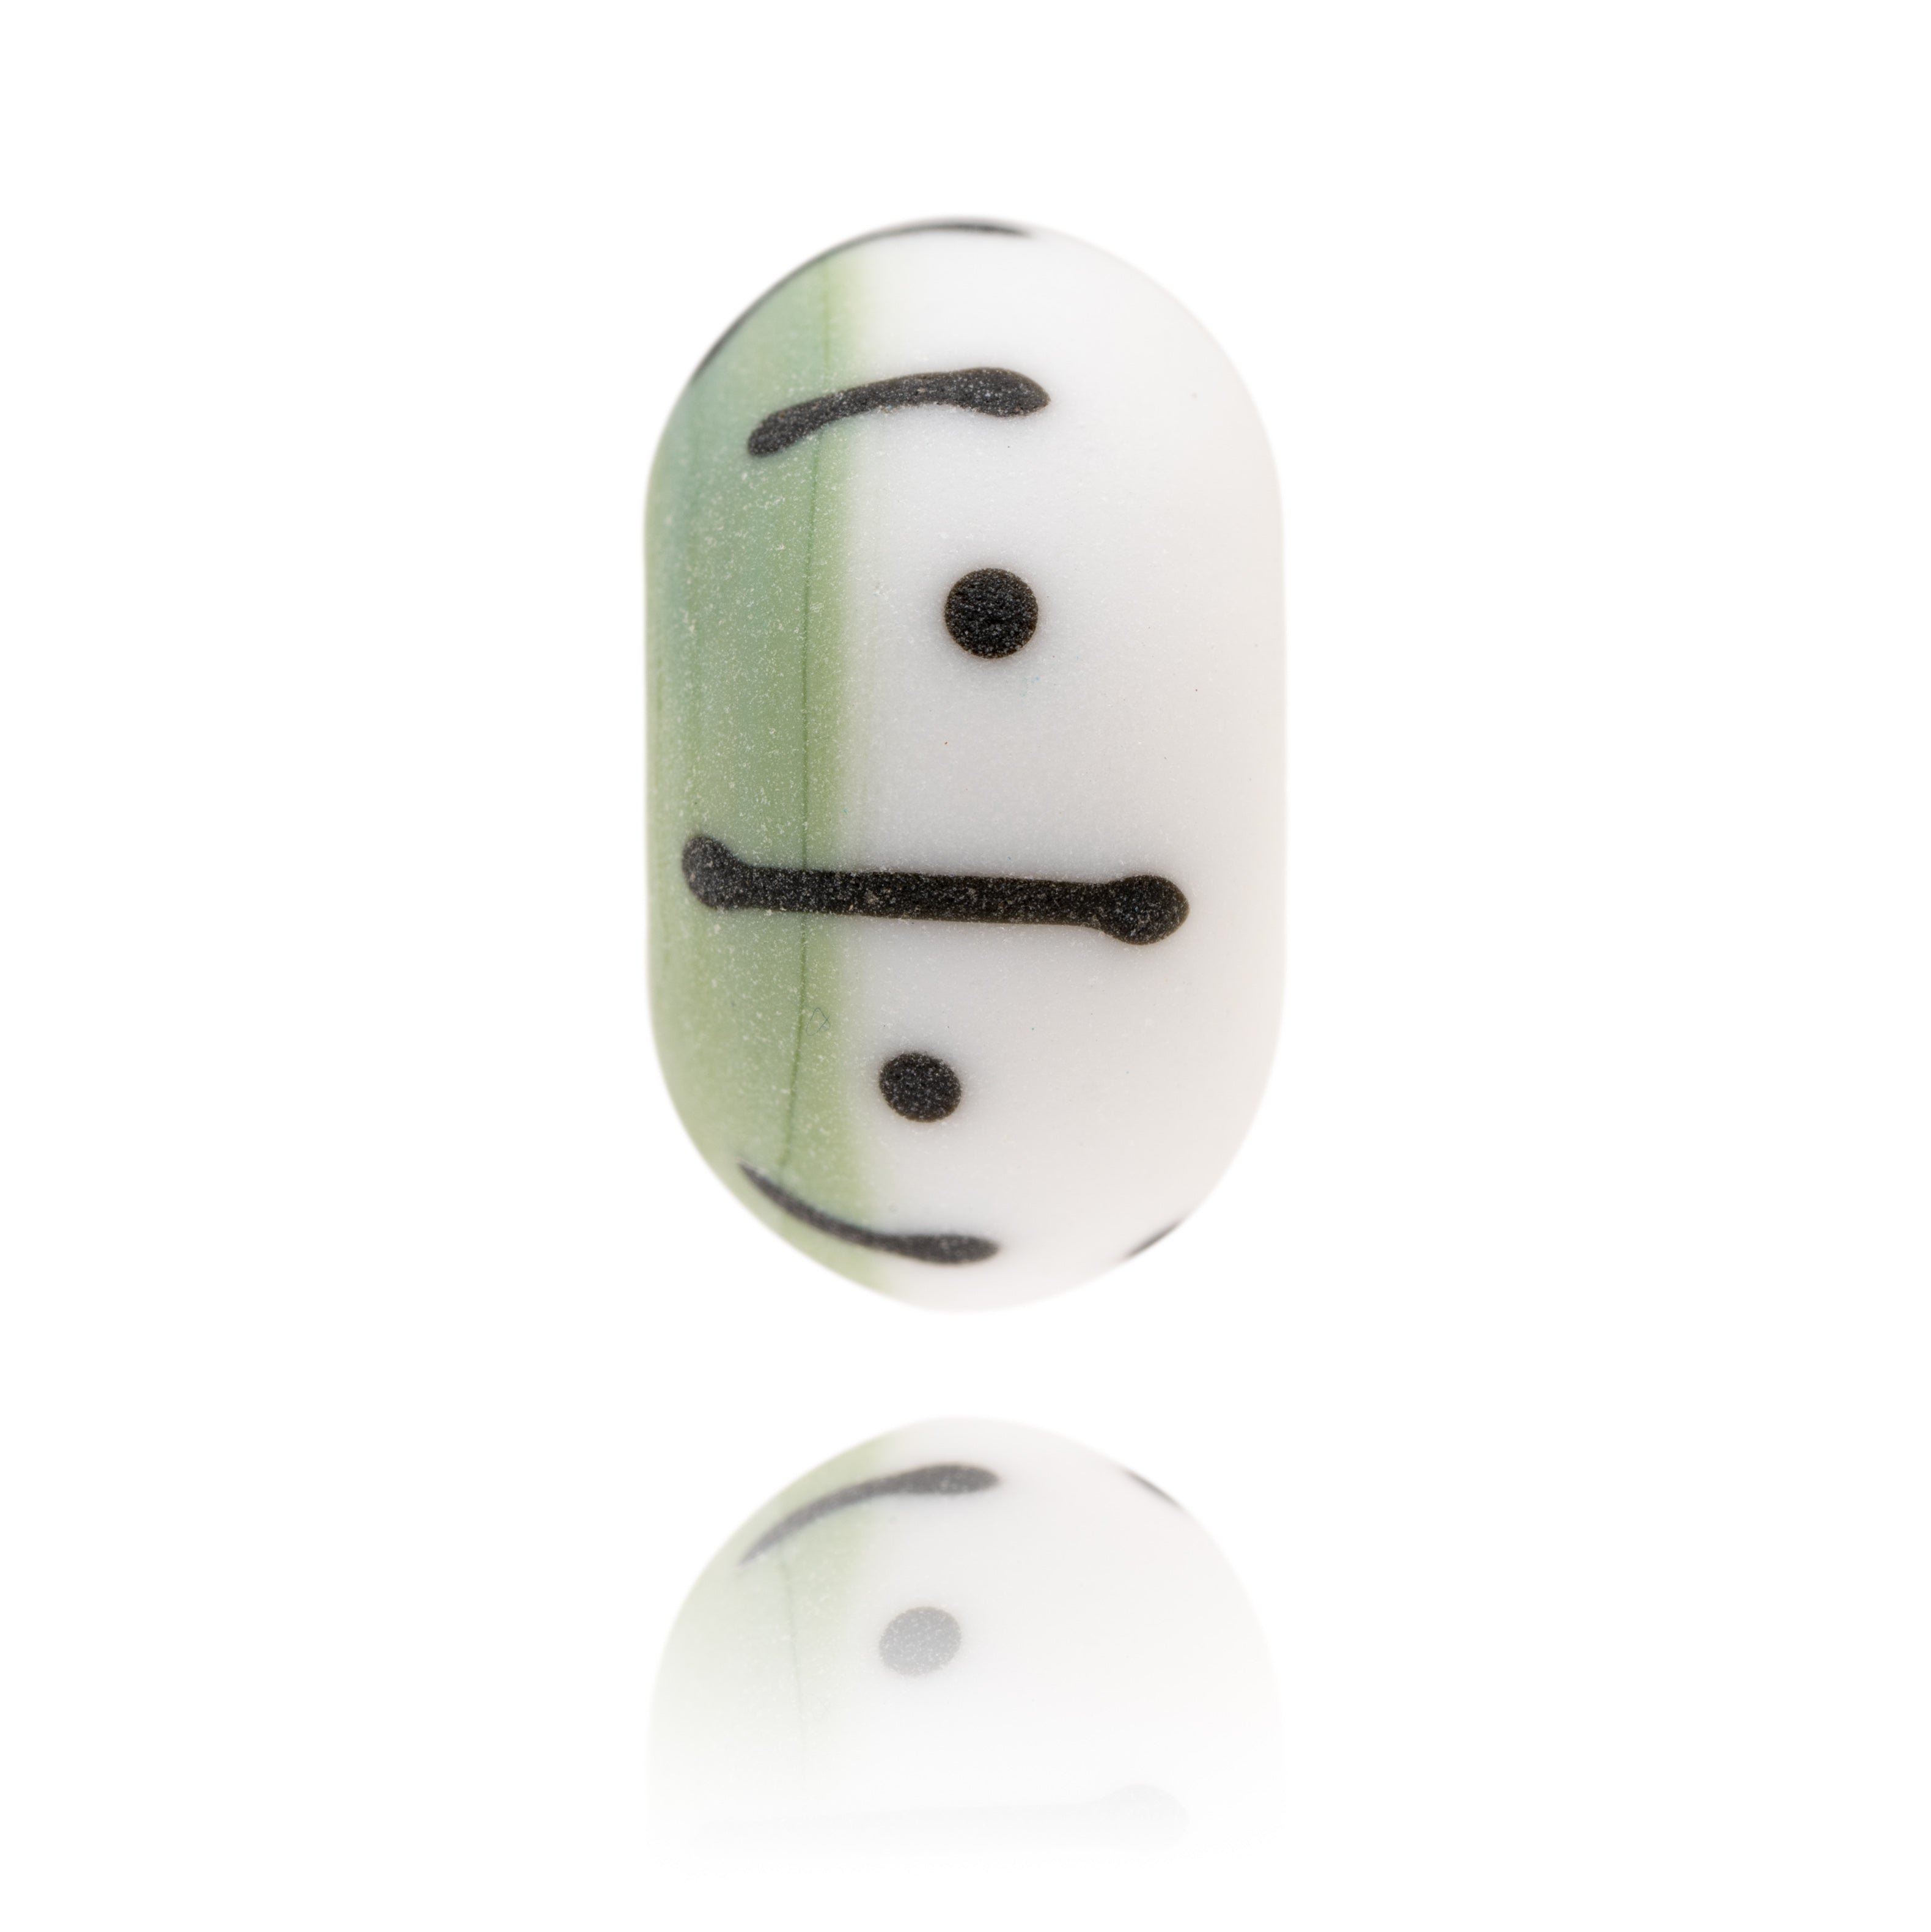 Green and white Murano glass bead decorated with black dots and stripes, representing Eastbourne Beach in Sussex.